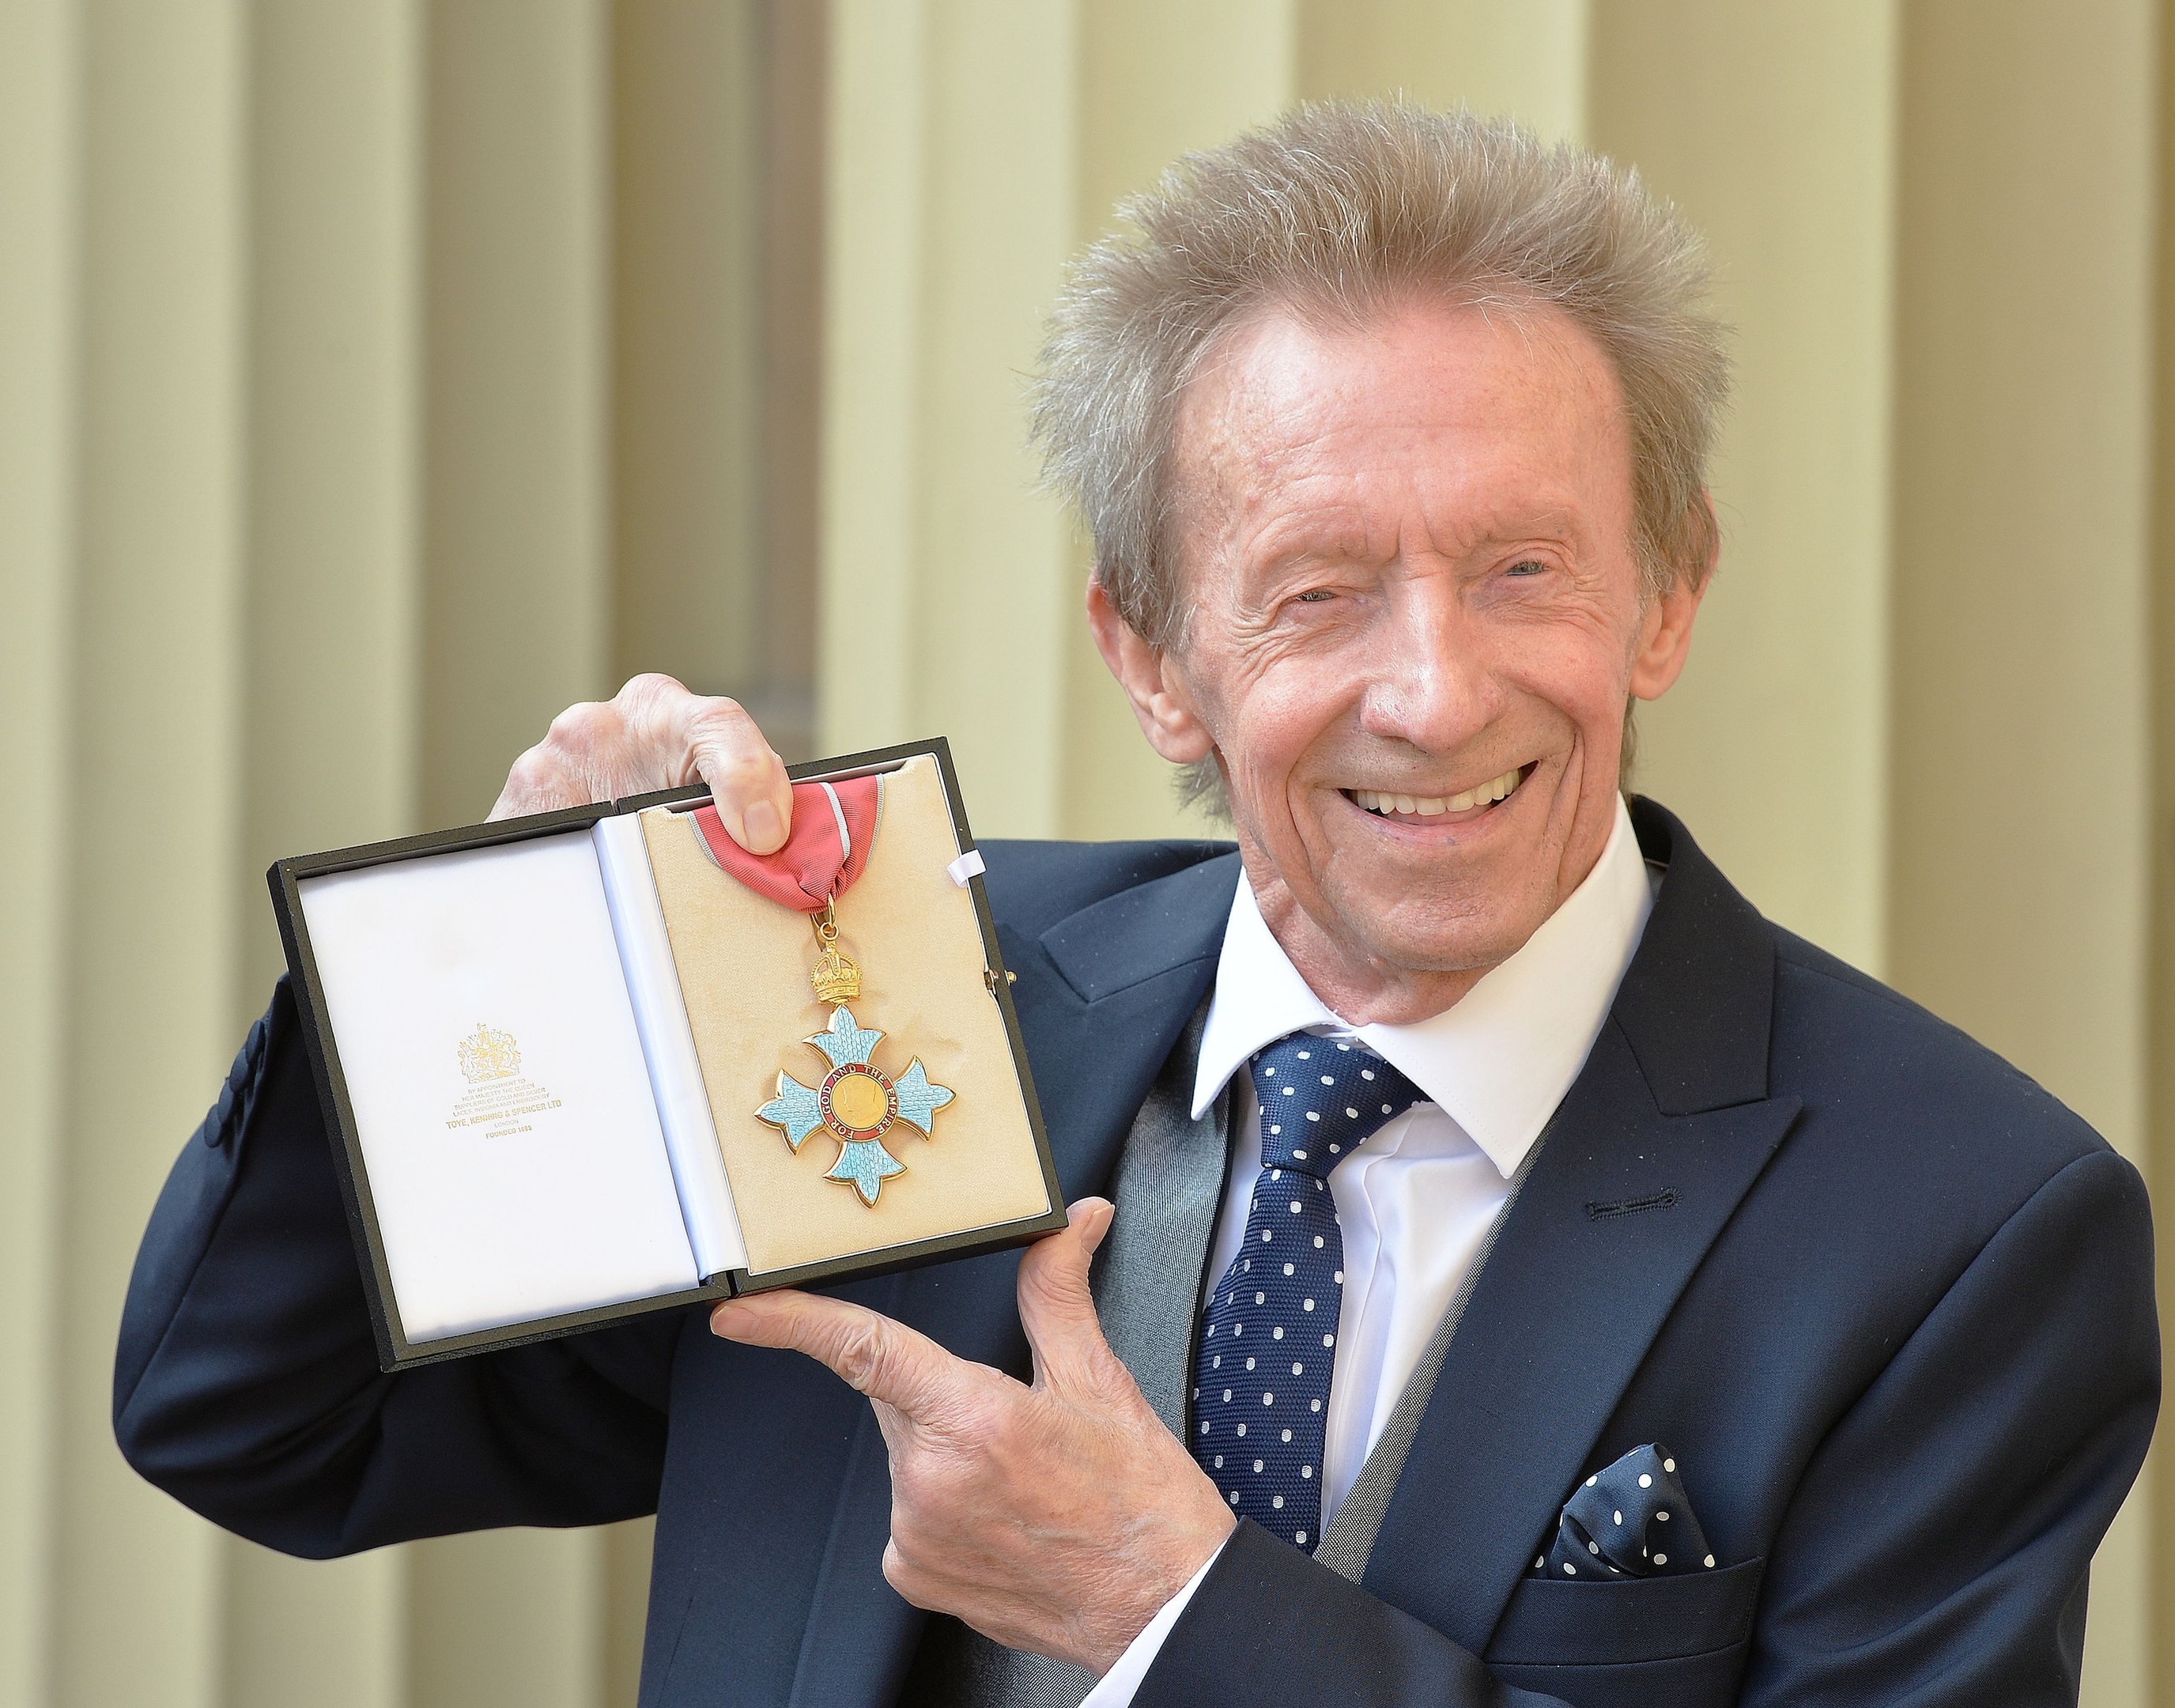 Former Scotland and Manchester United football great Denis Law holds his  Commander of the Order of the British Empire (CBE) medal that was presented to him by the Duke of Cambridge at an Investiture ceremony in Buckingham Palace, London. PRESS ASSOCIATION Photo. Picture date: Friday March 11, 2016. Photo credit should read: John Stillwell/PA Wire